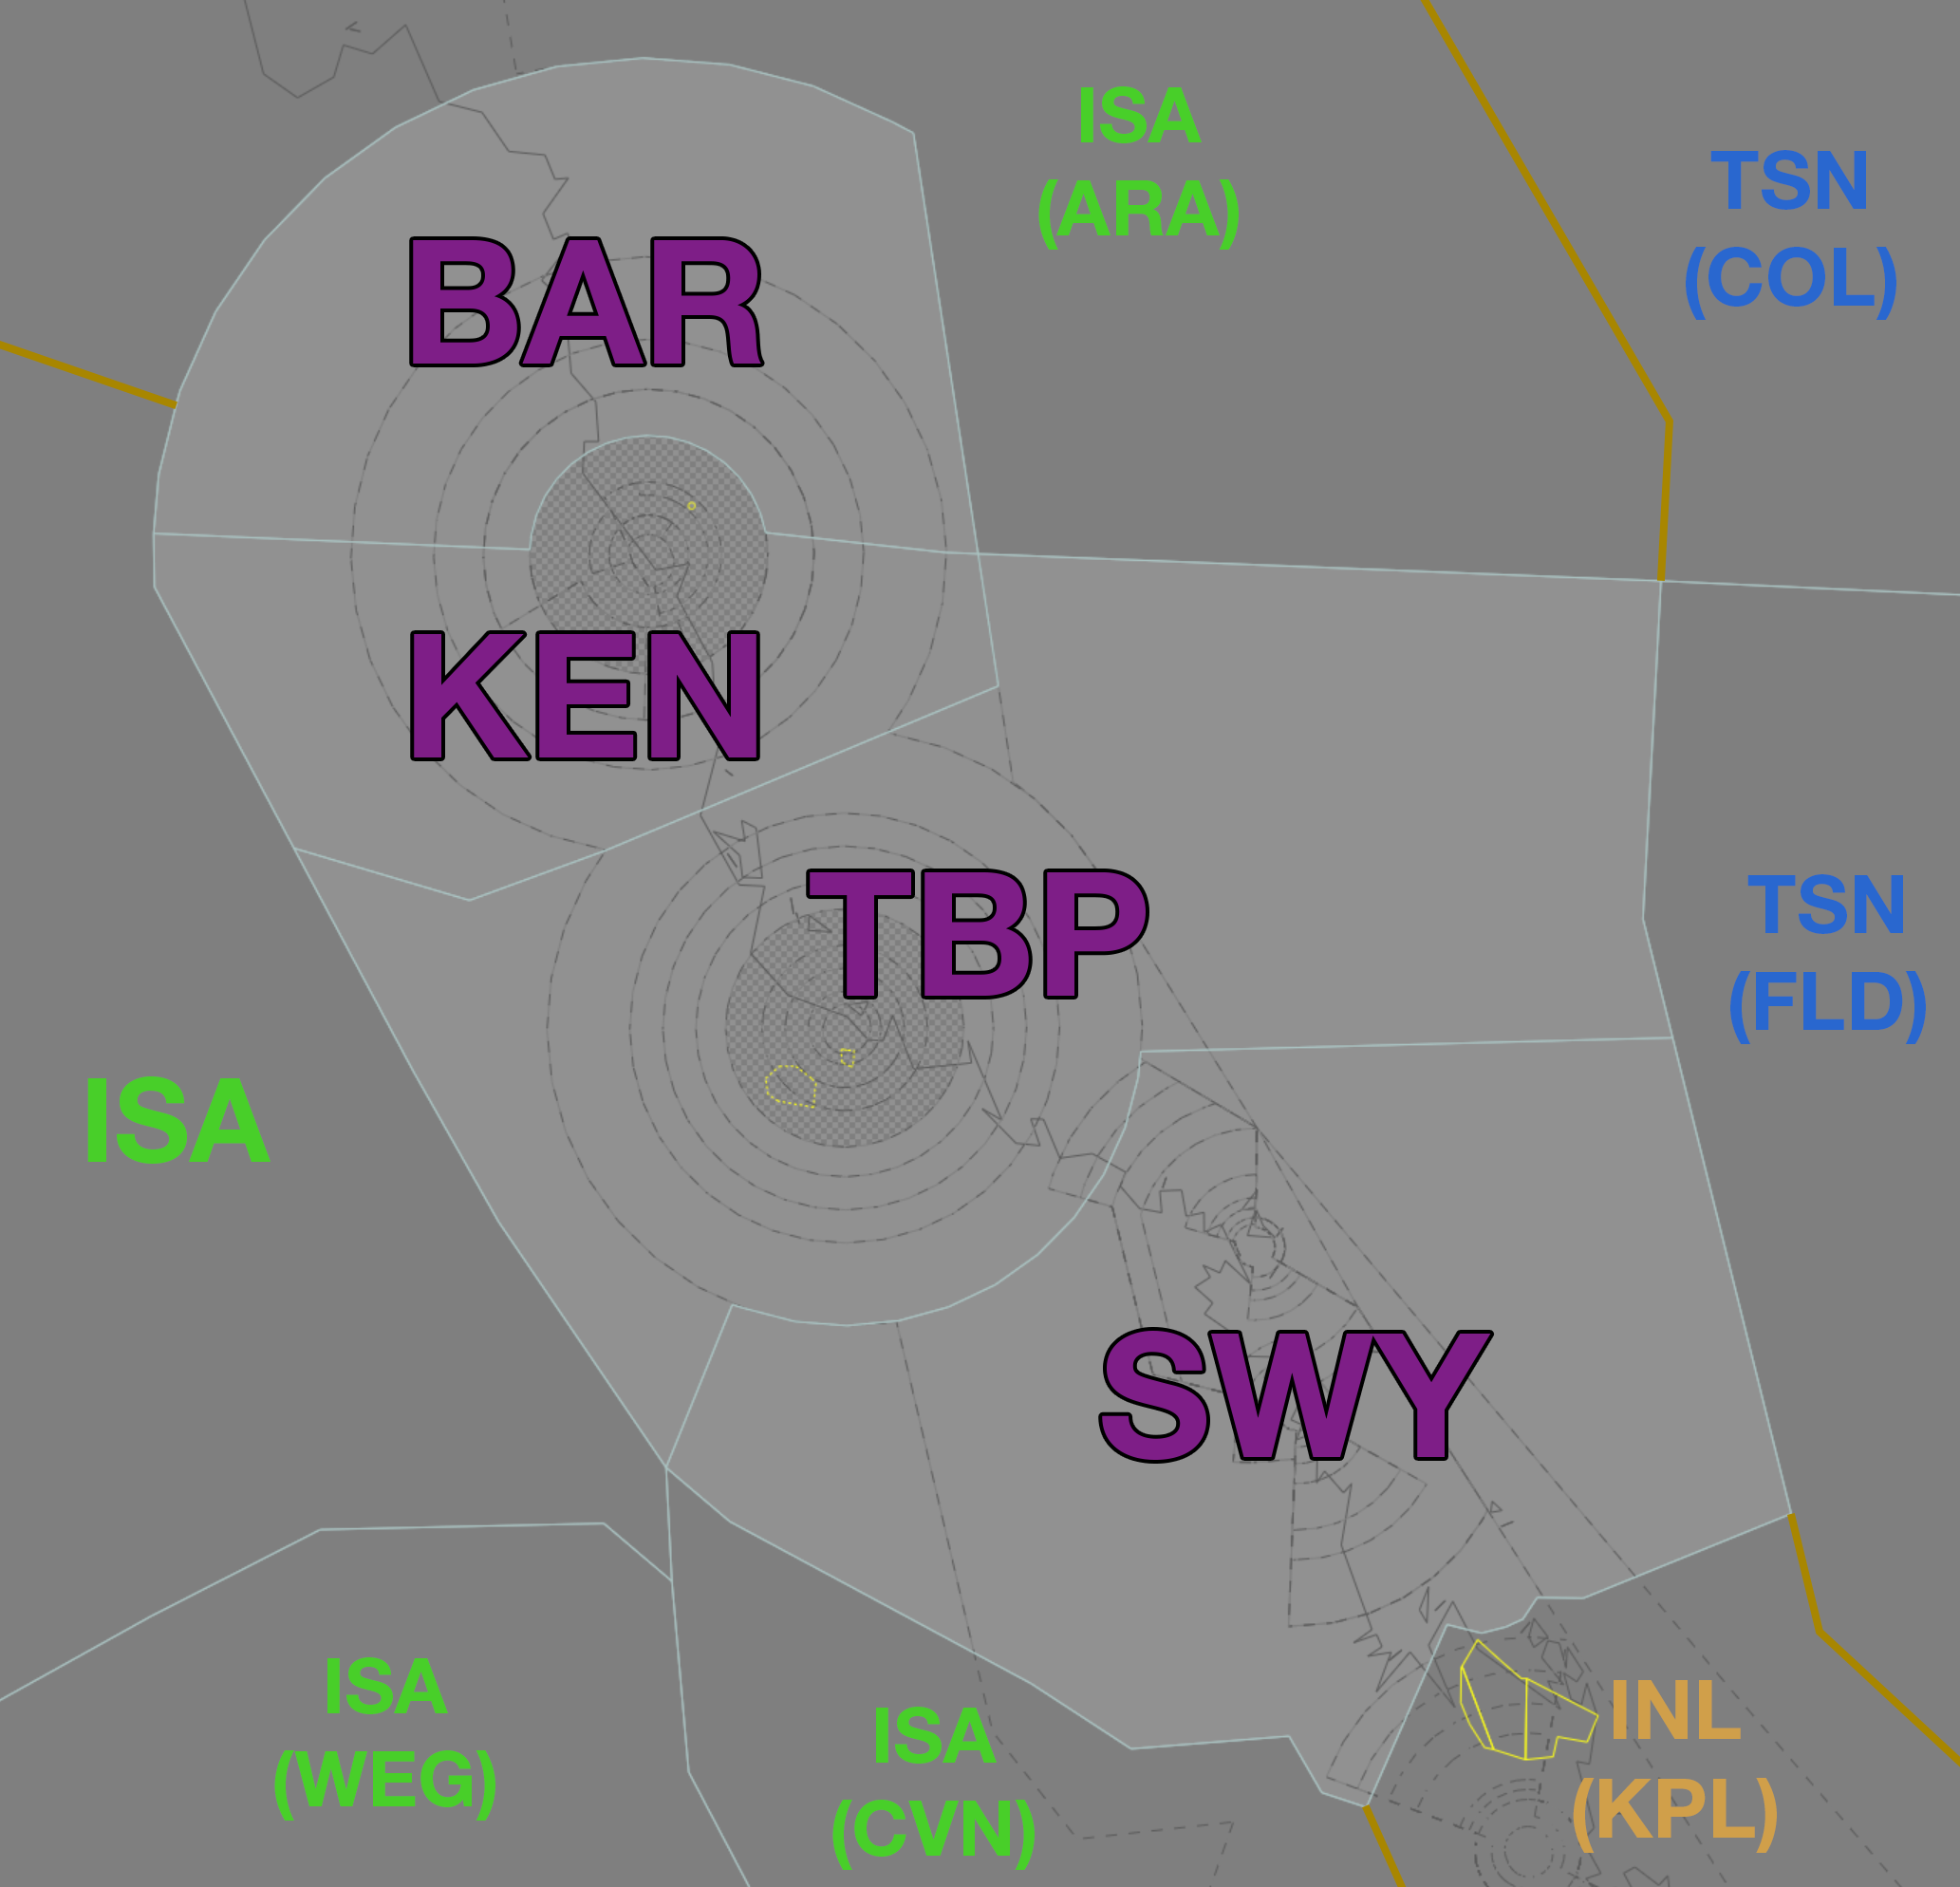 Kennedy Airspace